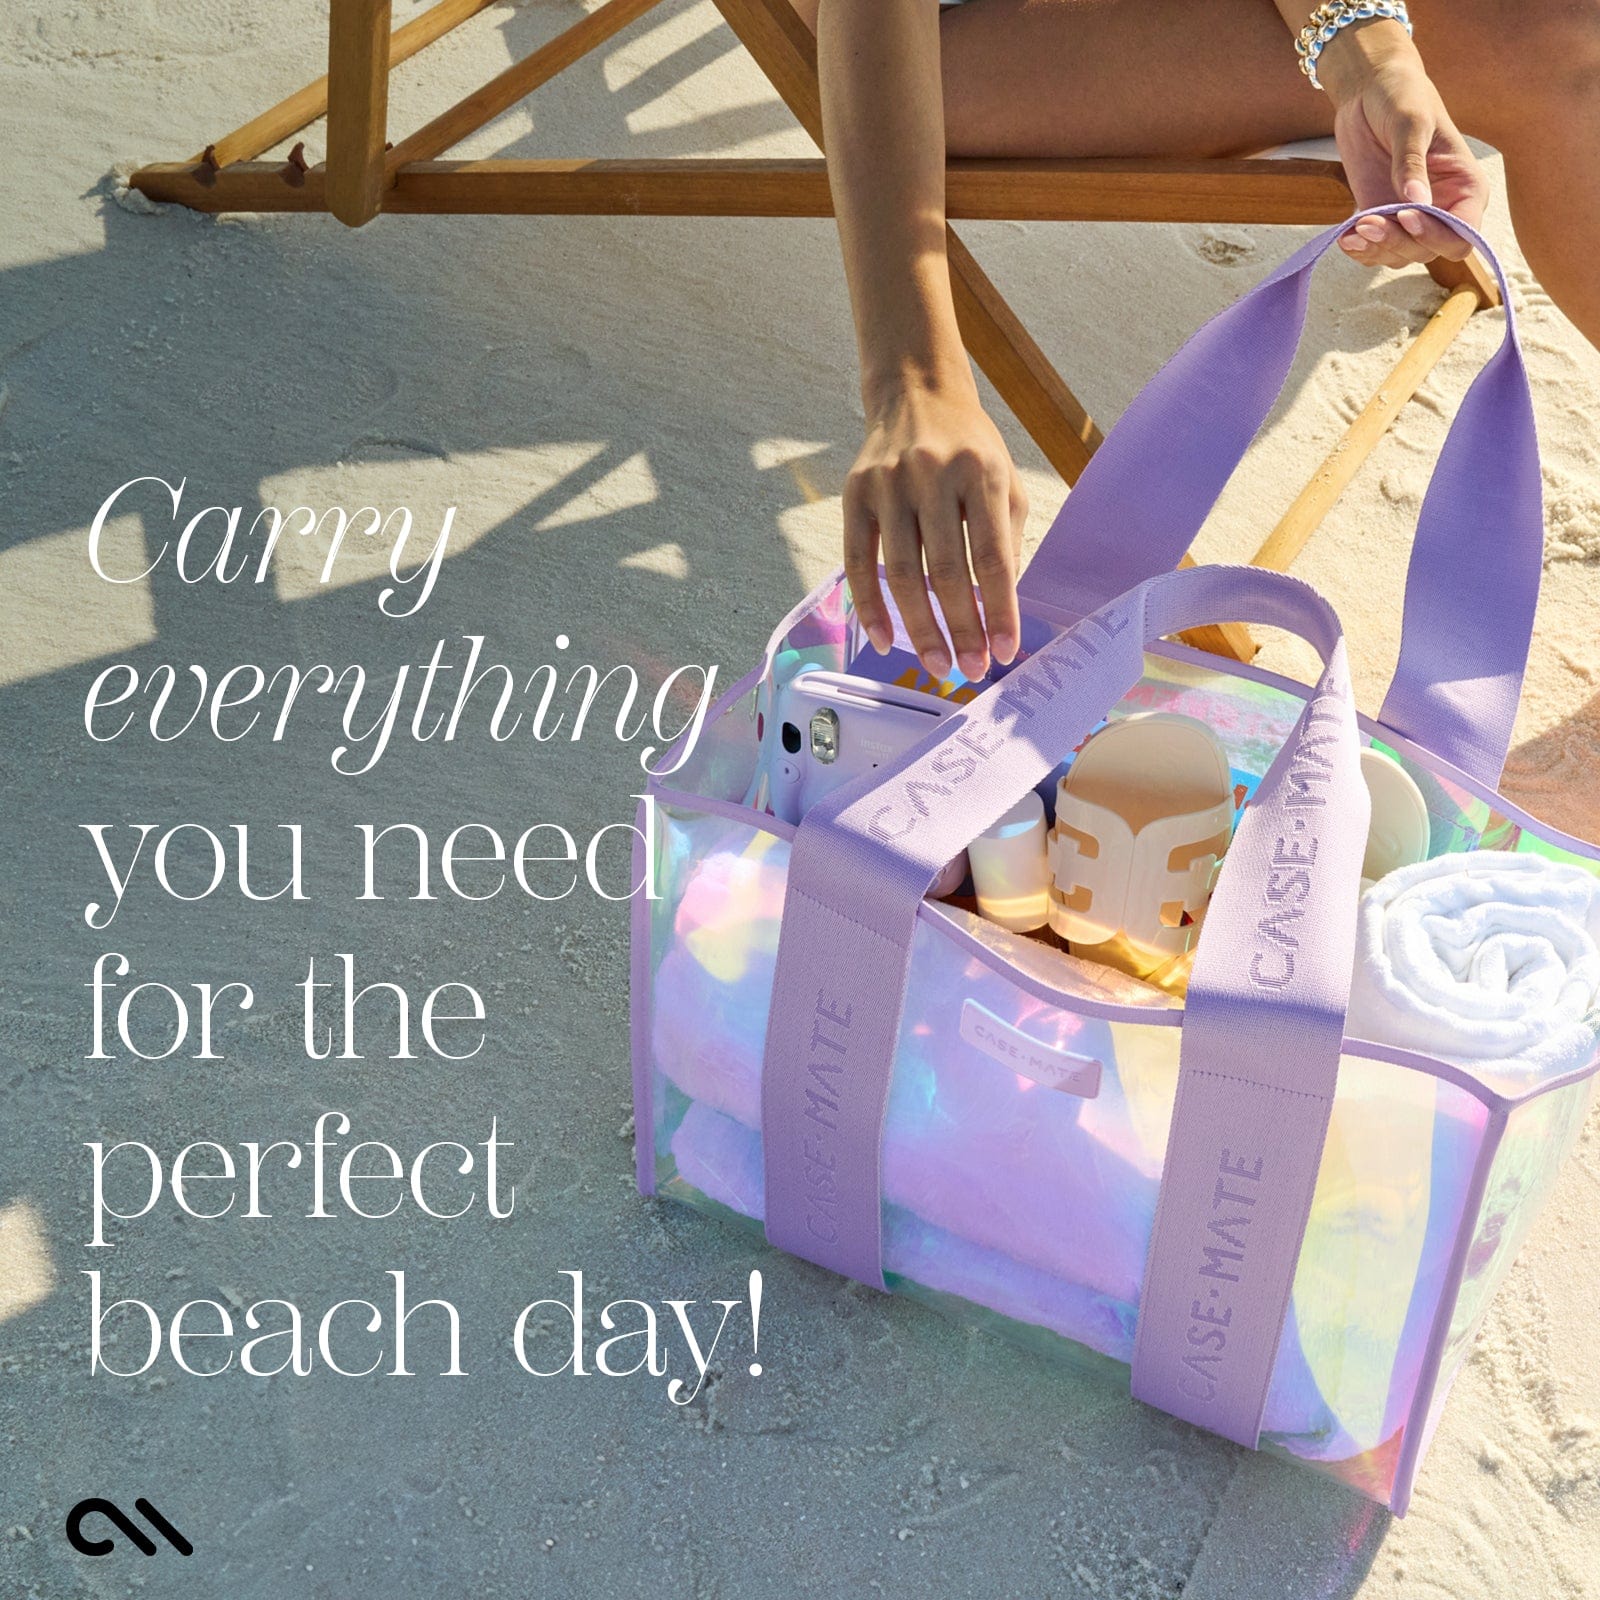 Case-Mate Beach Tote with Phone Pouch